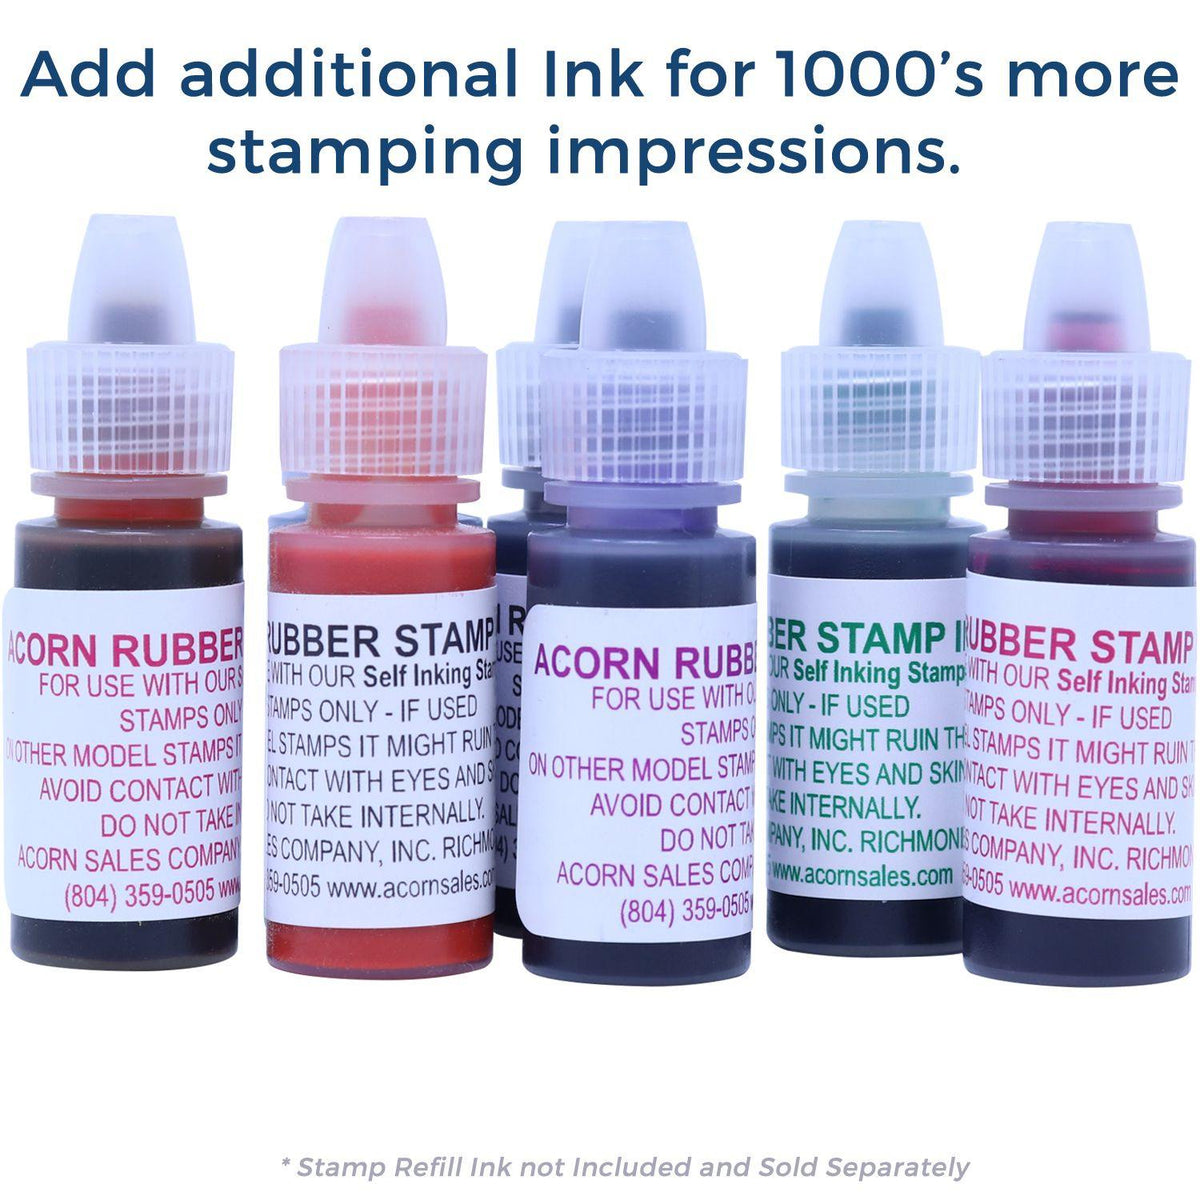 Slim Pre-Inked Bold Fragile Stamp - Engineer Seal Stamps - Brand_Slim, Impression Size_Small, Stamp Type_Pre-Inked Stamp, Type of Use_General, Type of Use_Postal &amp; Mailing, Type of Use_Shipping &amp; Receiving